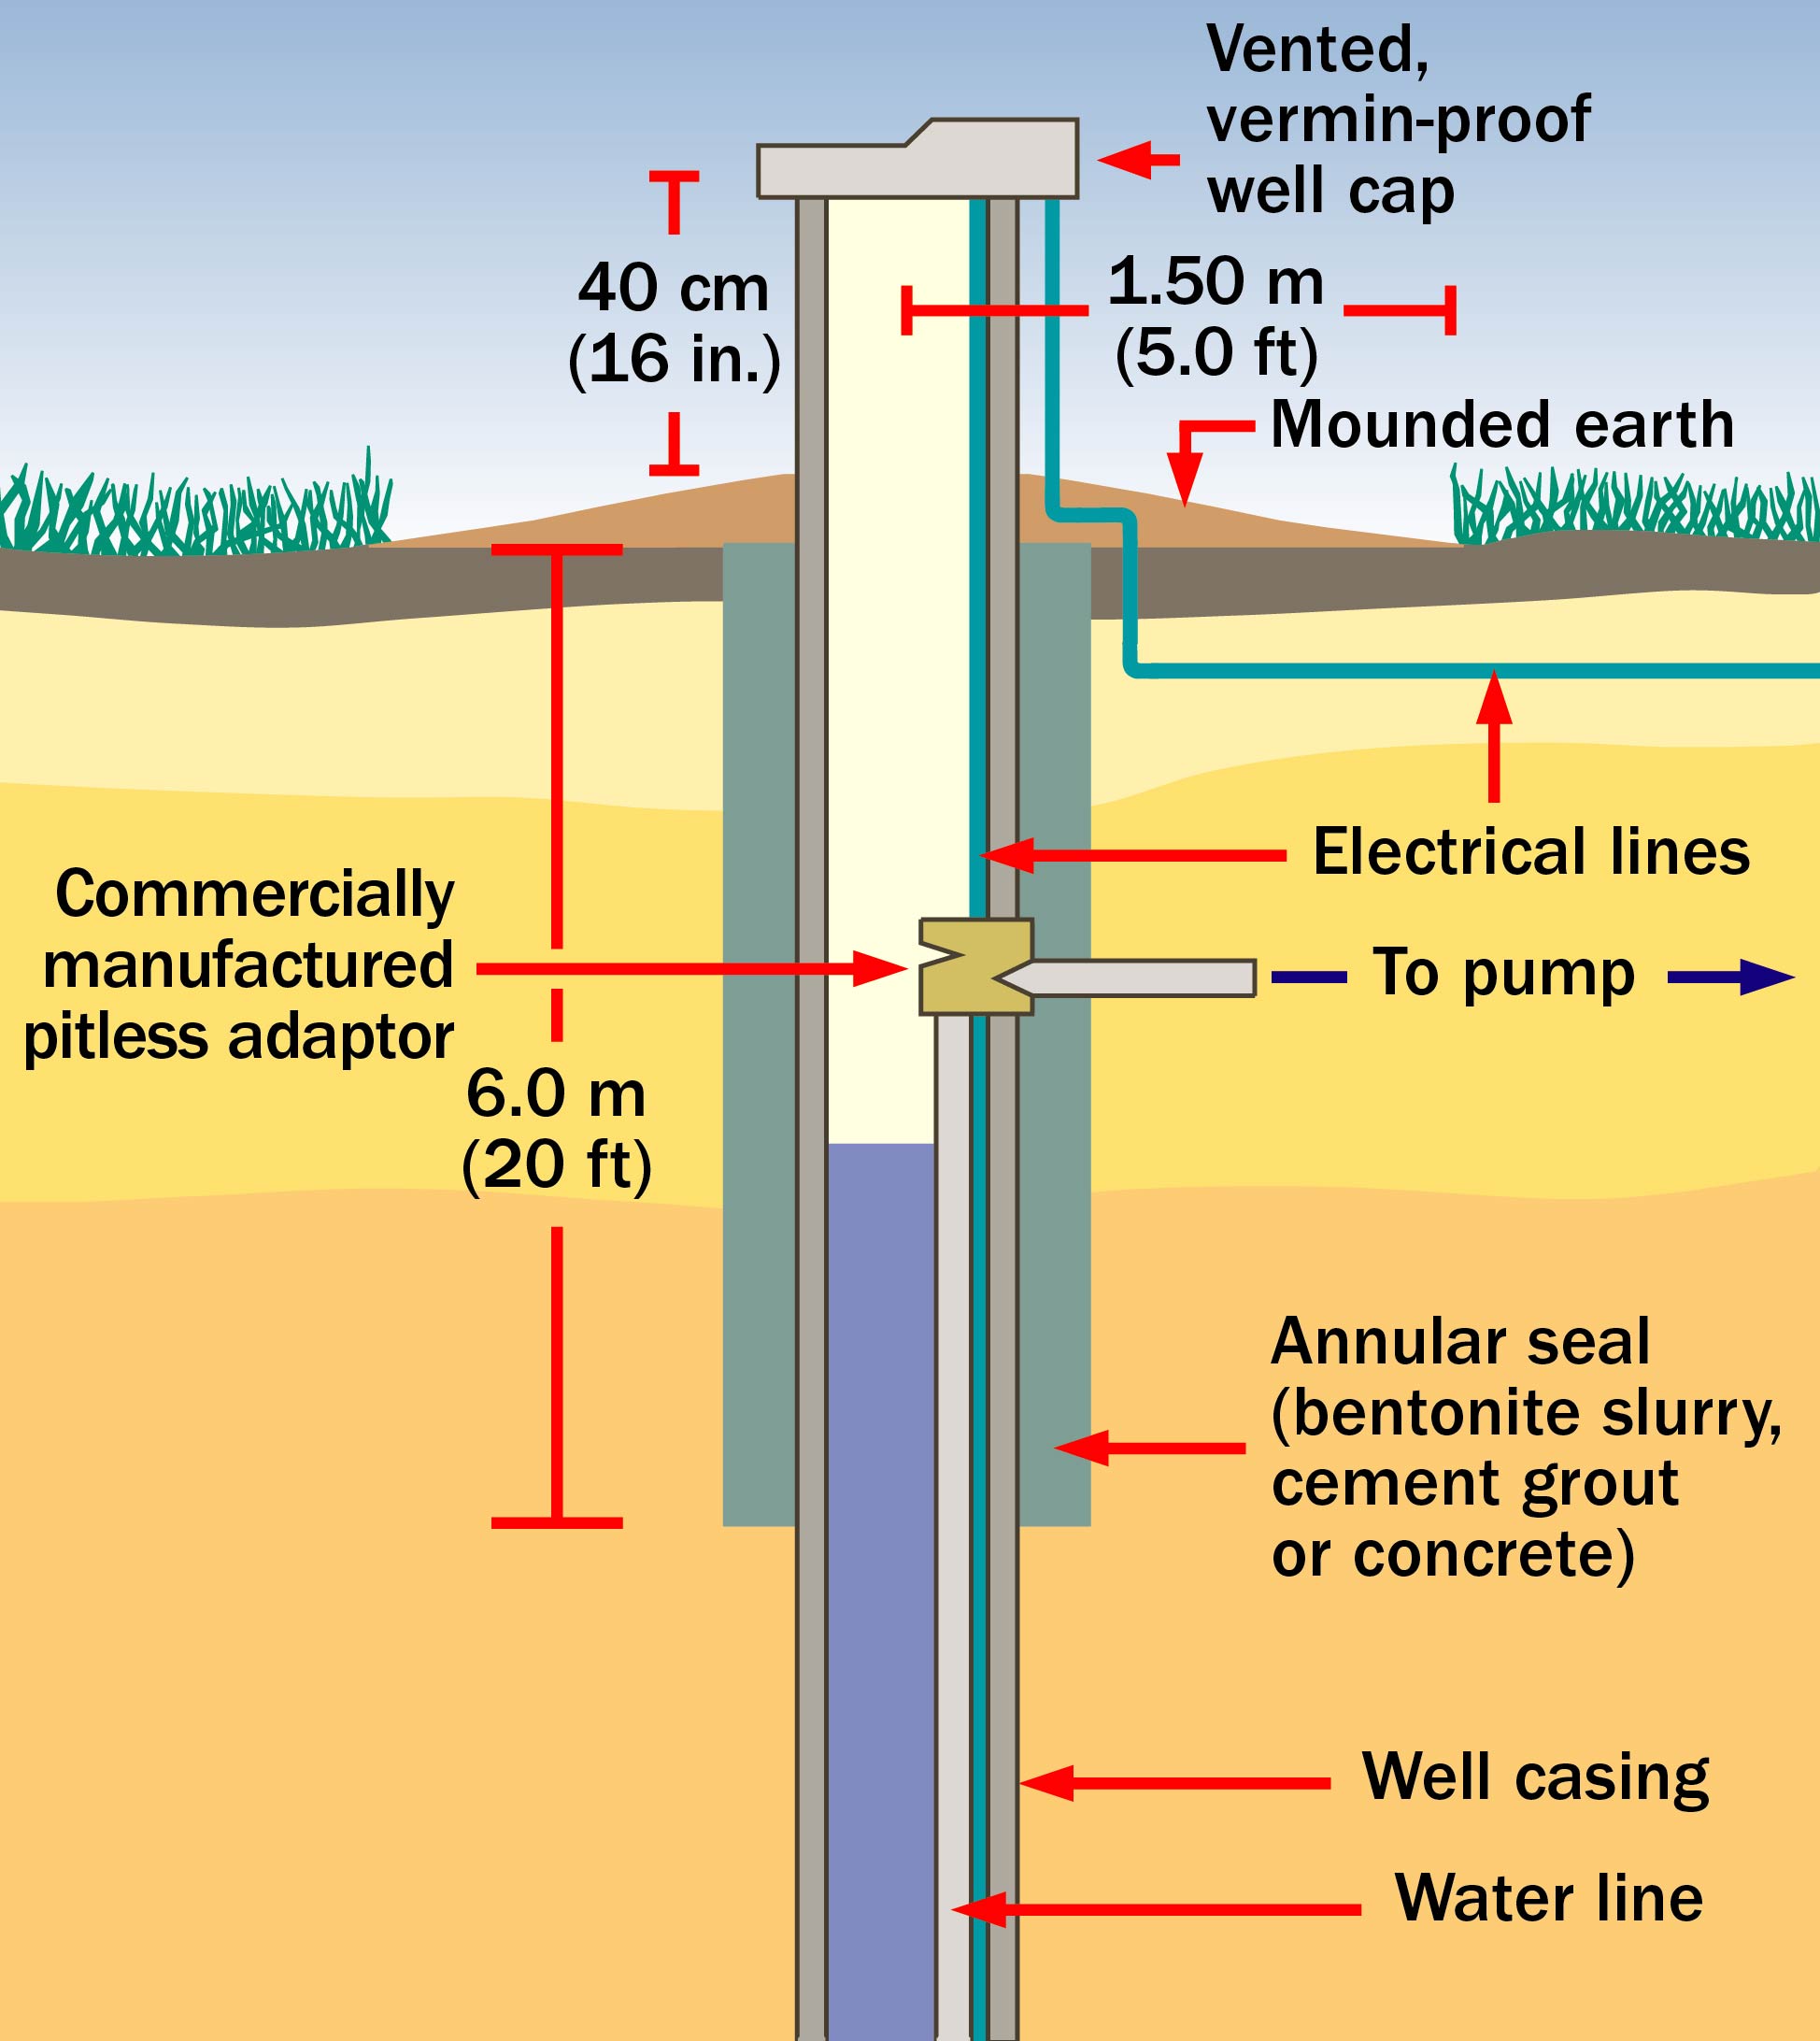 Figure 2. Diagram showing subsurface view of drilled over-burden well into a sand or gravel aquifer. The well has a foot valve topped with a packer seal, the static water level rises to a watertight casing surrounded by an annular seal made of cement grout, concrete, bentonite or clay slurry.